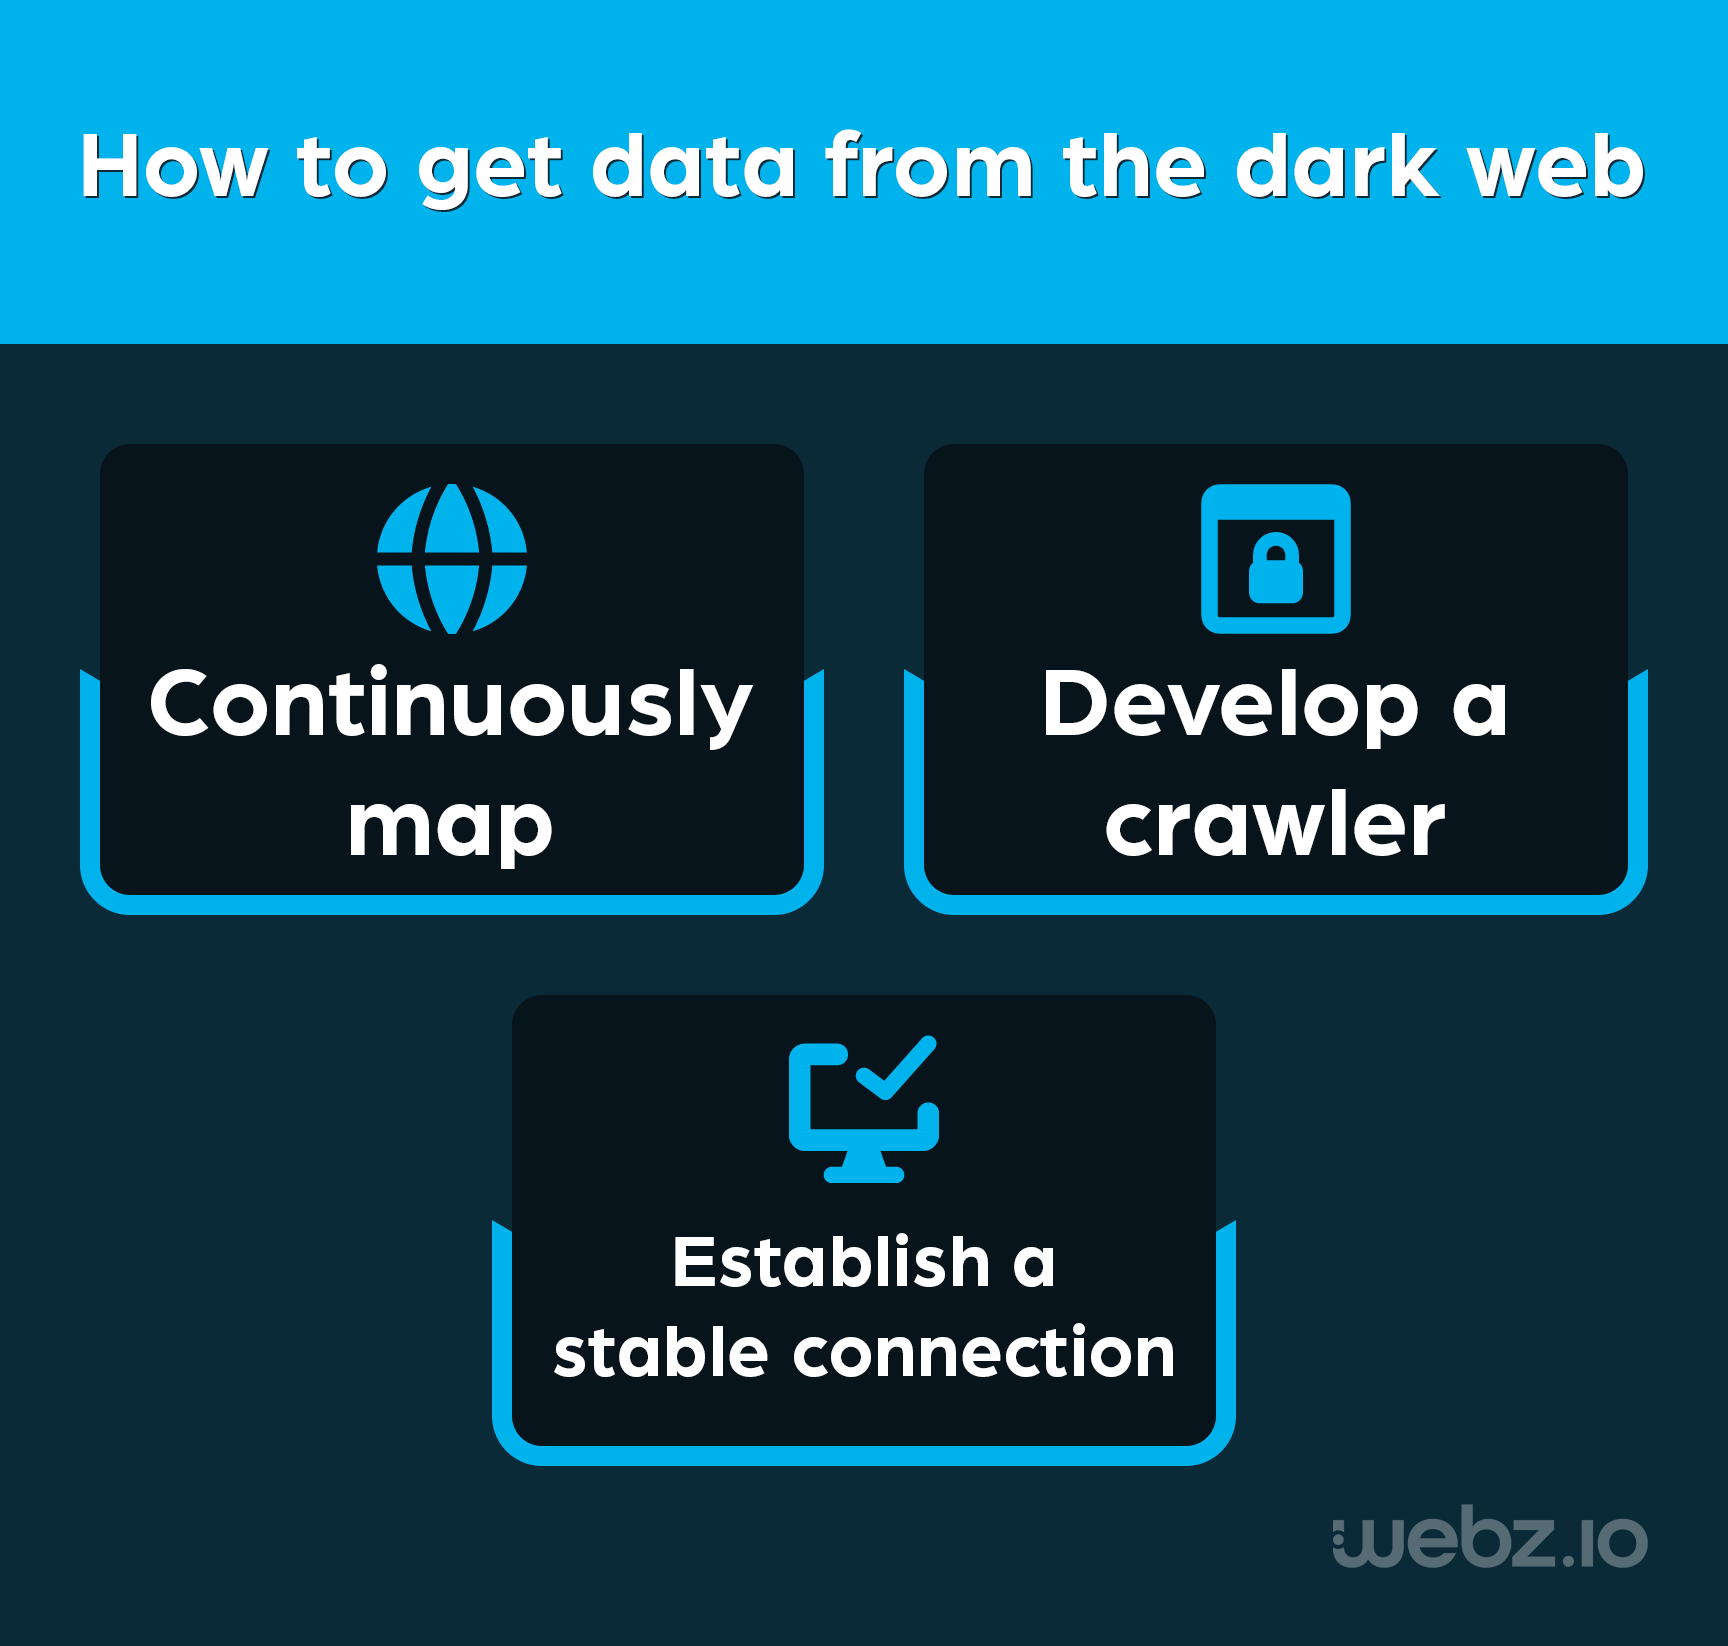 How to get data from the dark web